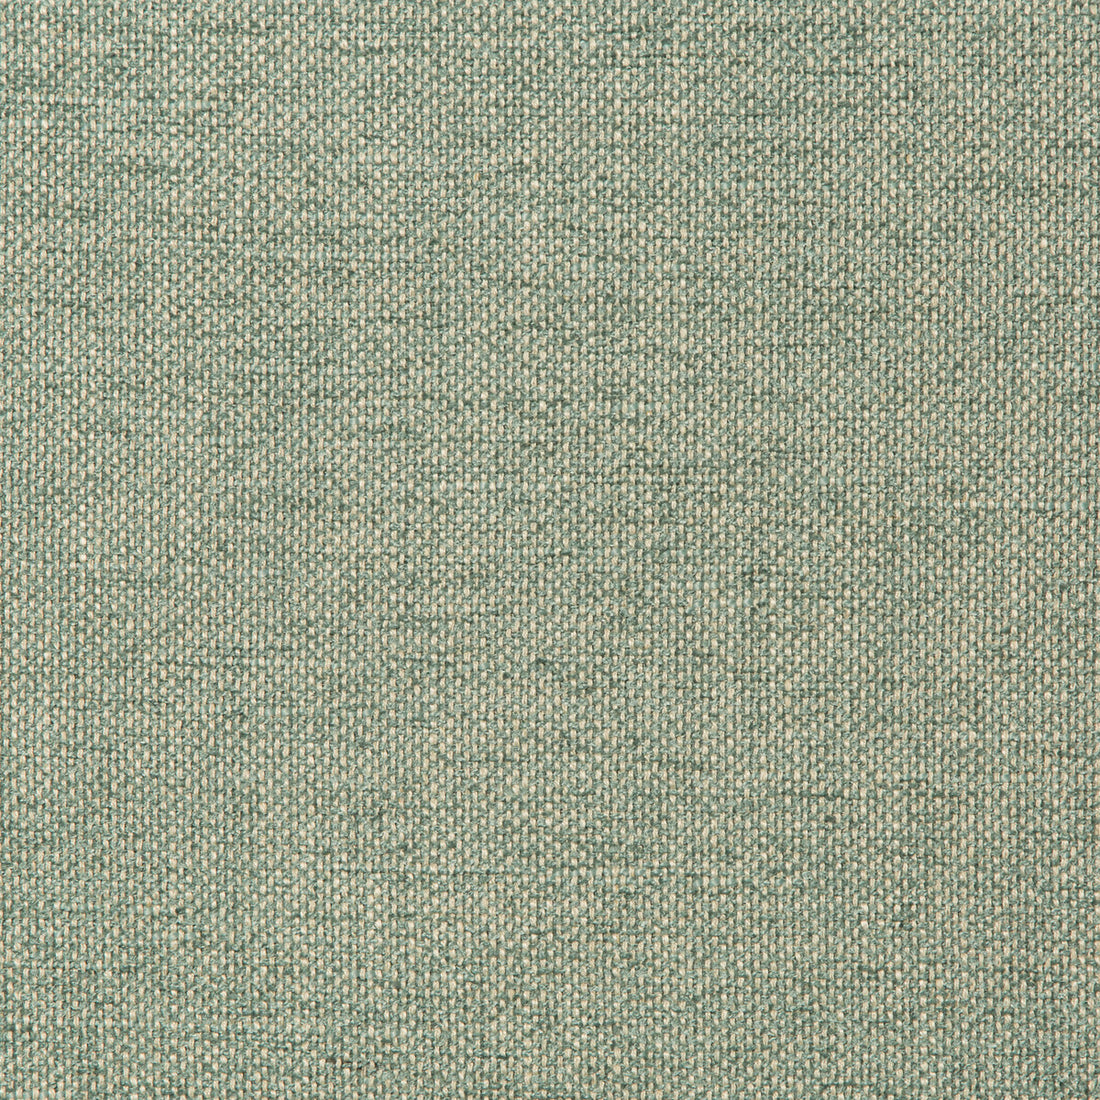 Kravet Smart fabric in 35989-13 color - pattern 35989.13.0 - by Kravet Smart in the Performance Crypton Home collection